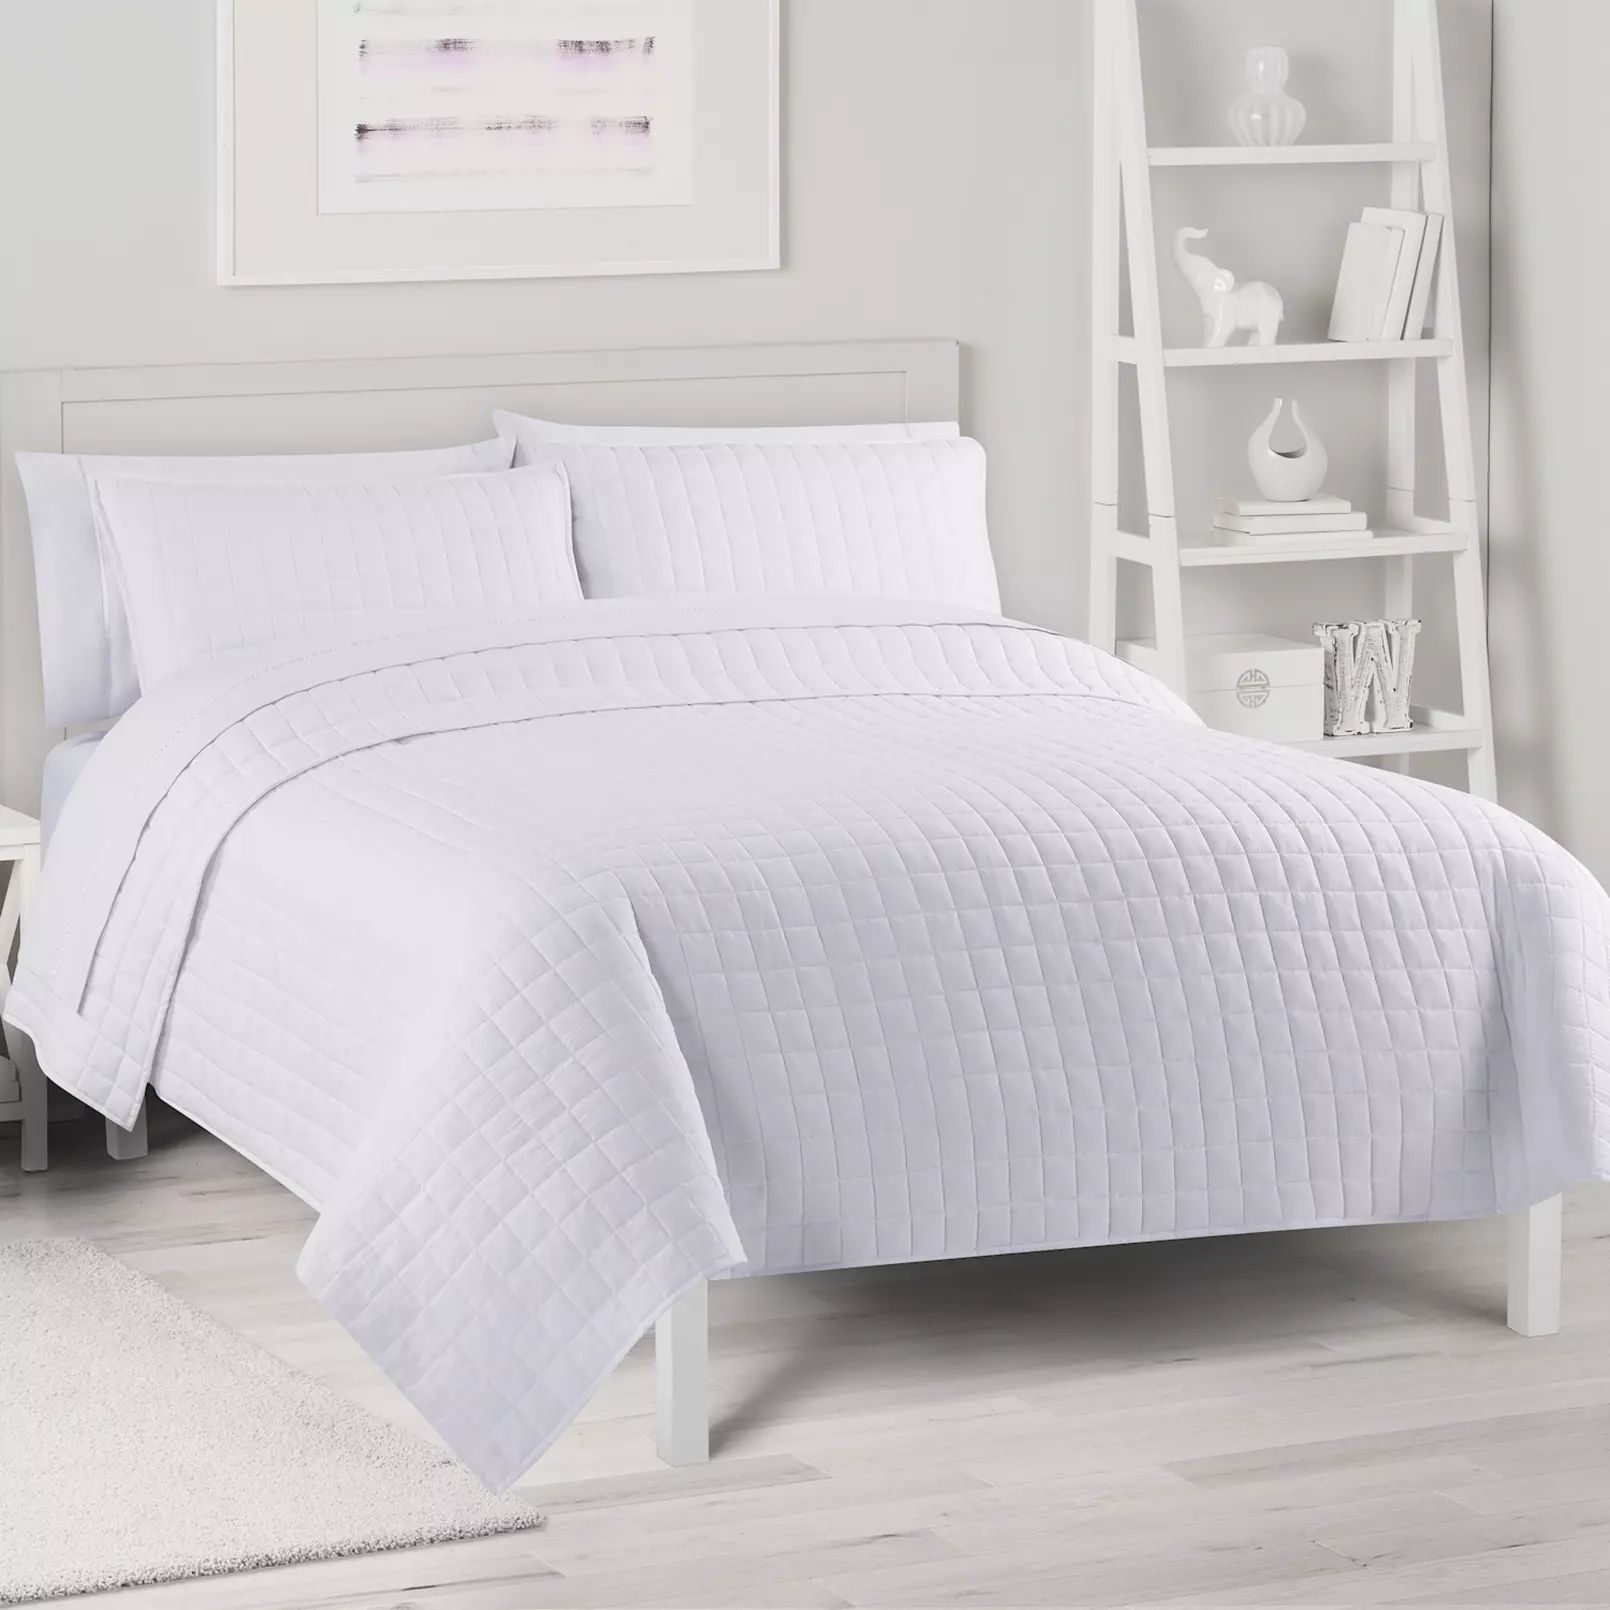 The Big One® Garment Washed Quilt Set with Shams | Kohl's